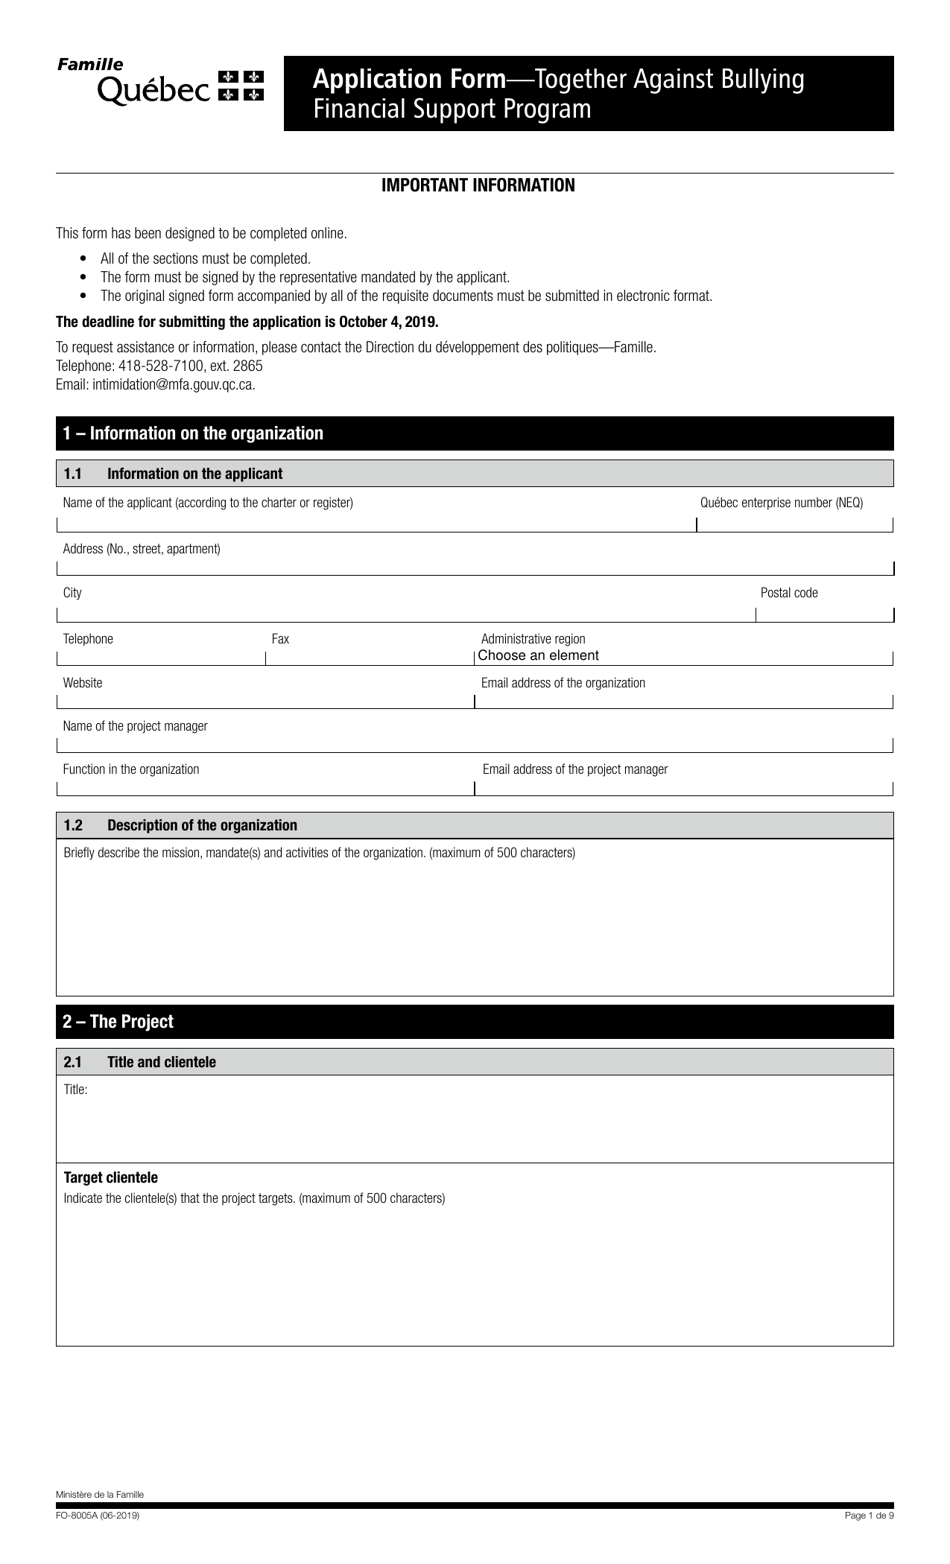 Form FO-8005A Application Form - Together Against Bullying Financial Support Program - Quebec, Canada, Page 1